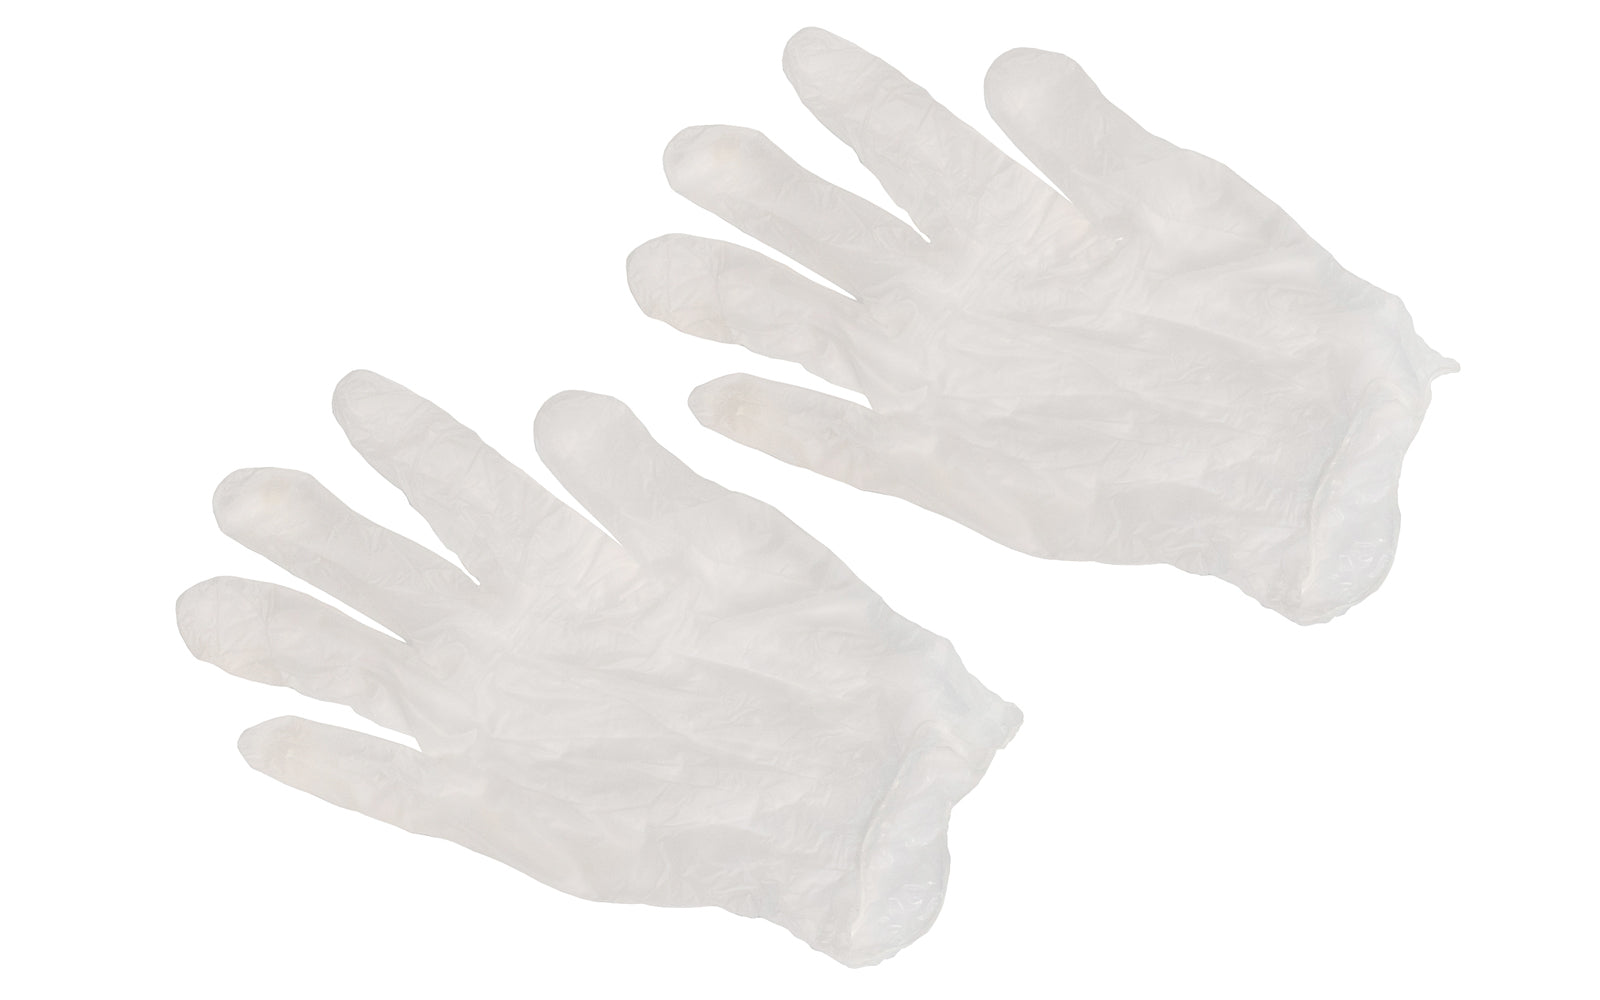 These powder-free Vinyl gloves are good disposable gloves for a variety of uses including home improvement, light duty work, light shop use, painting, cleaning, hobby work, arts & crafts, etc. Beaded cuff style. Made by Boss